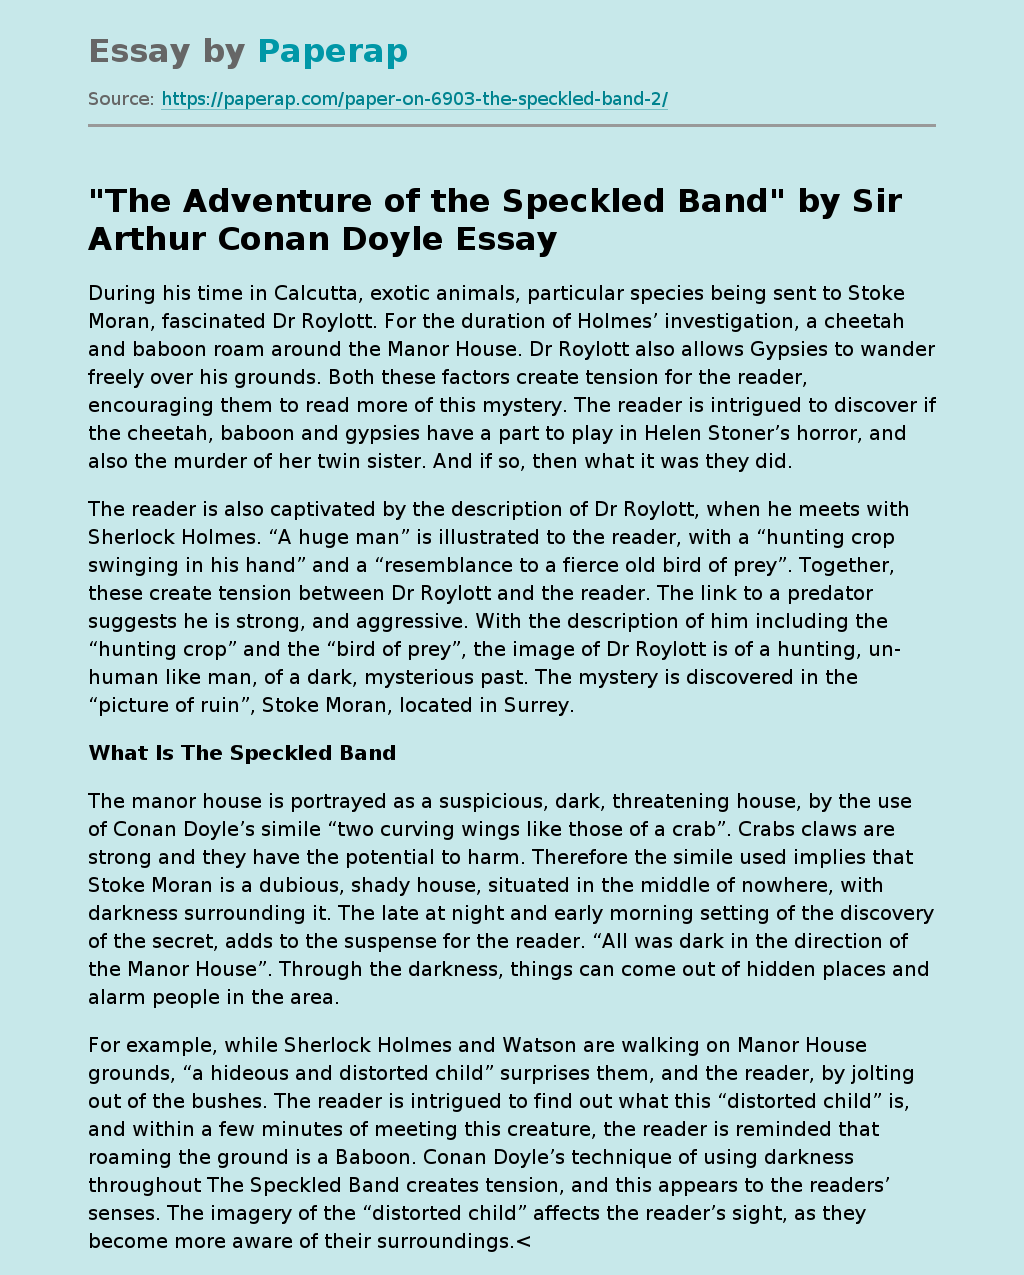 "The Adventure of the Speckled Band" by  Sir Arthur Conan Doyle